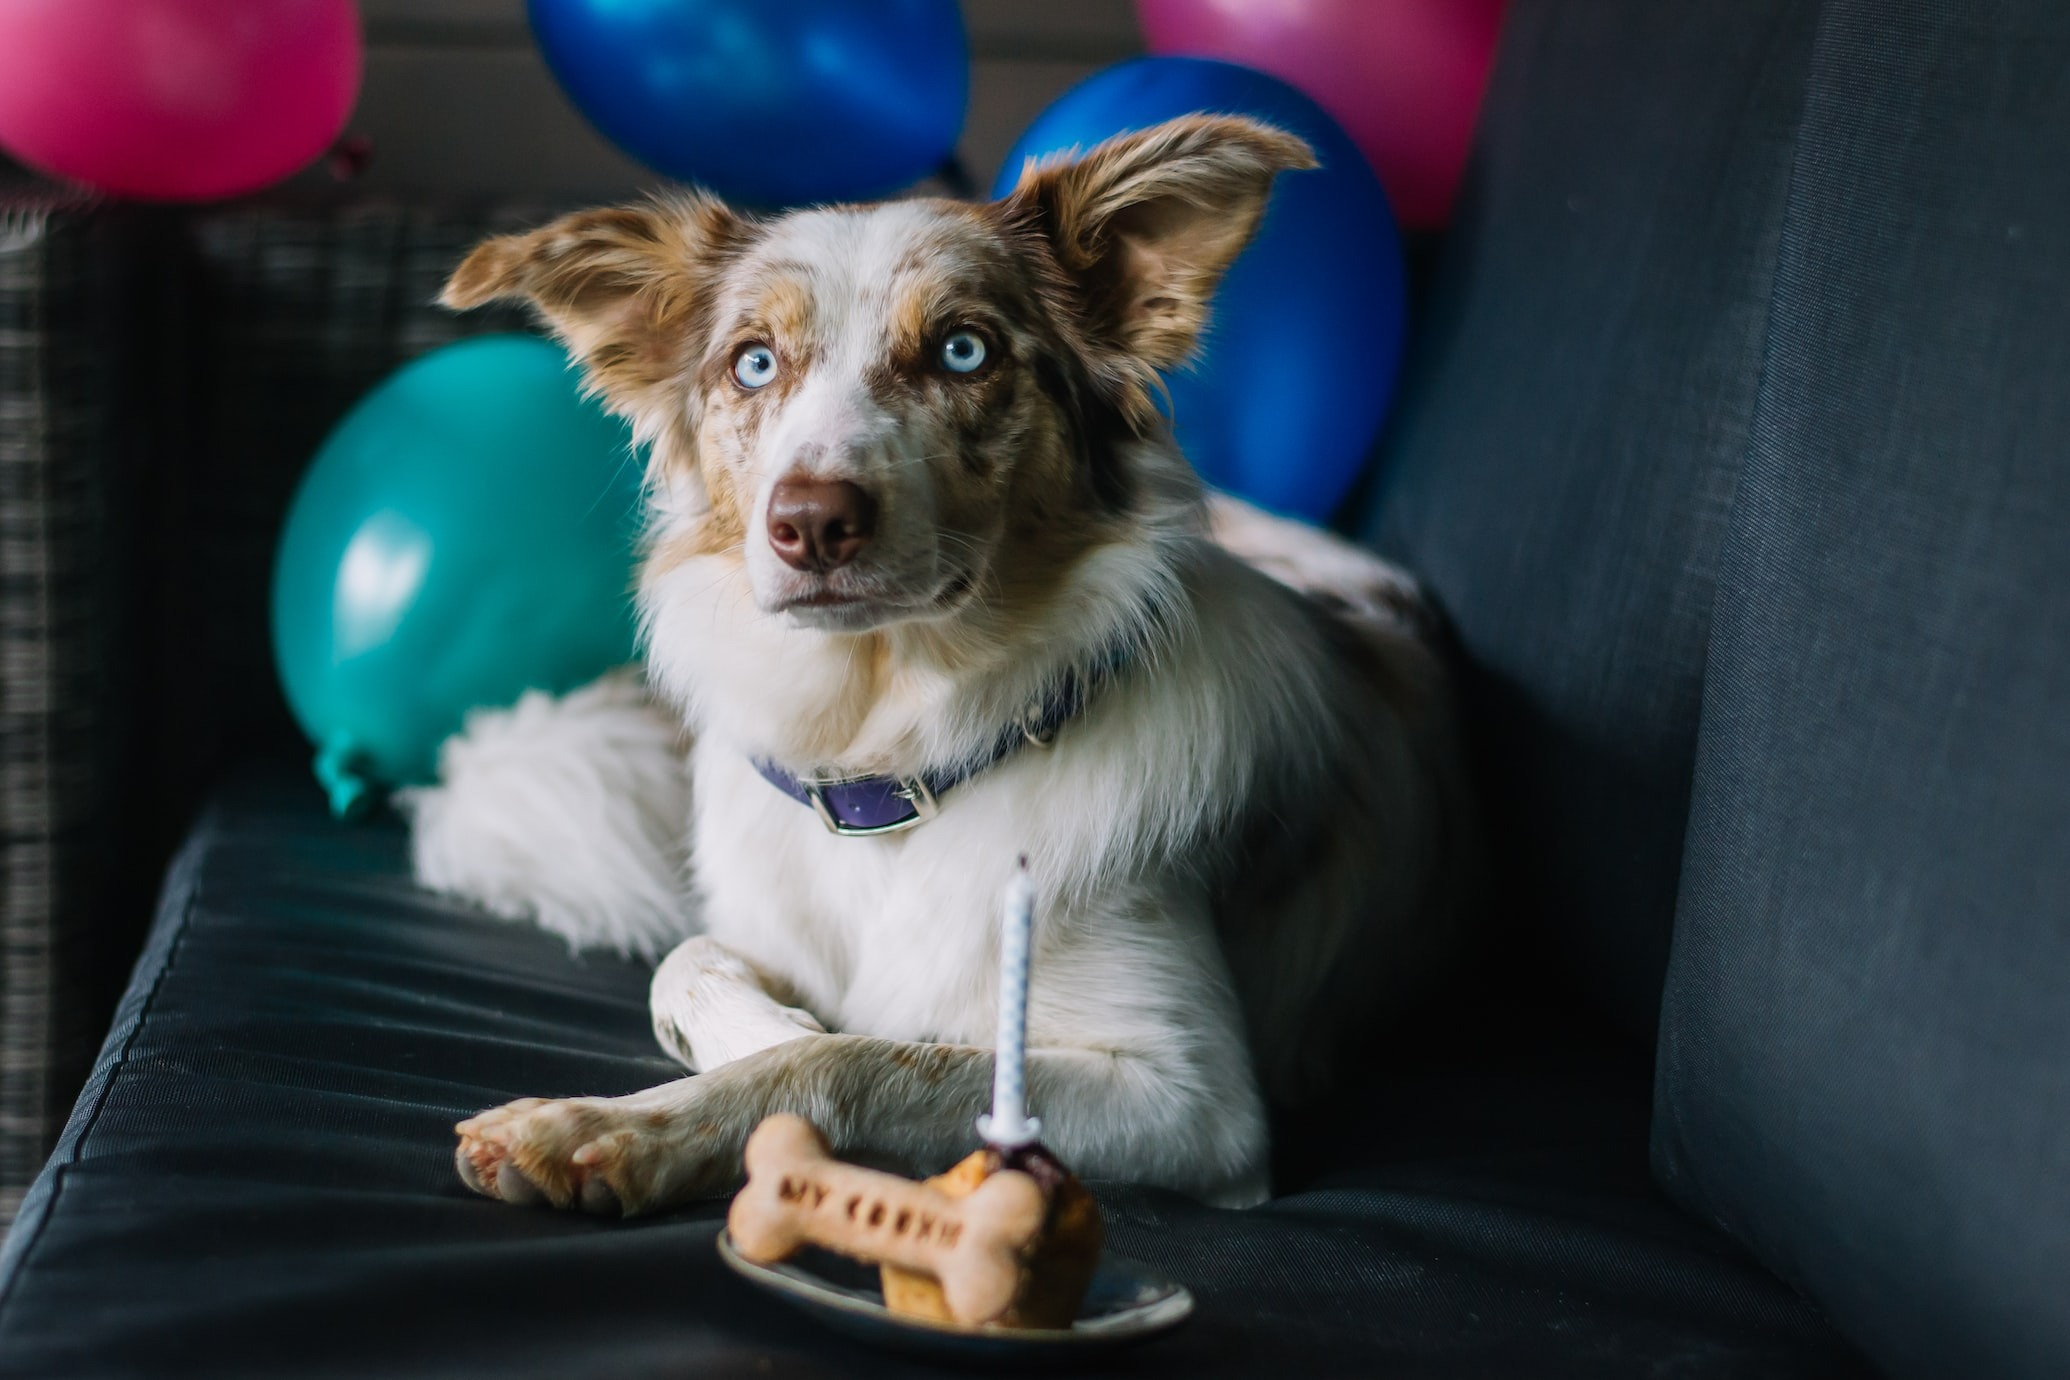 dog about to take a bite from its delicious birthday treat